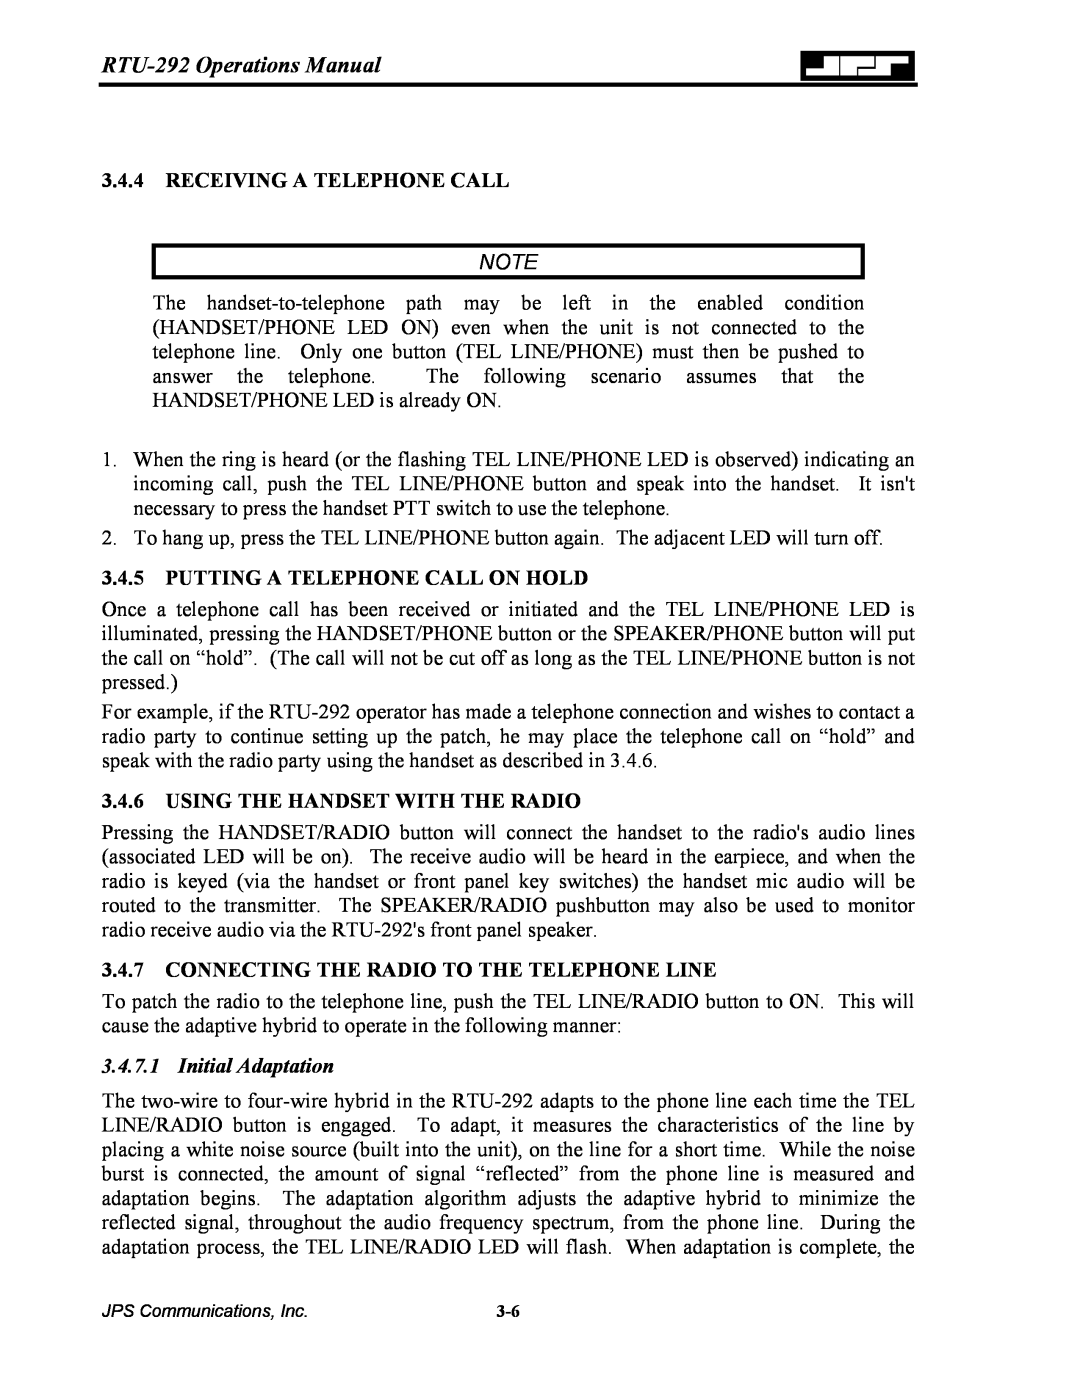 Nortel Networks operation manual RTU-292 Operations Manual, Receiving A Telephone Call, Putting A Telephone Call On Hold 